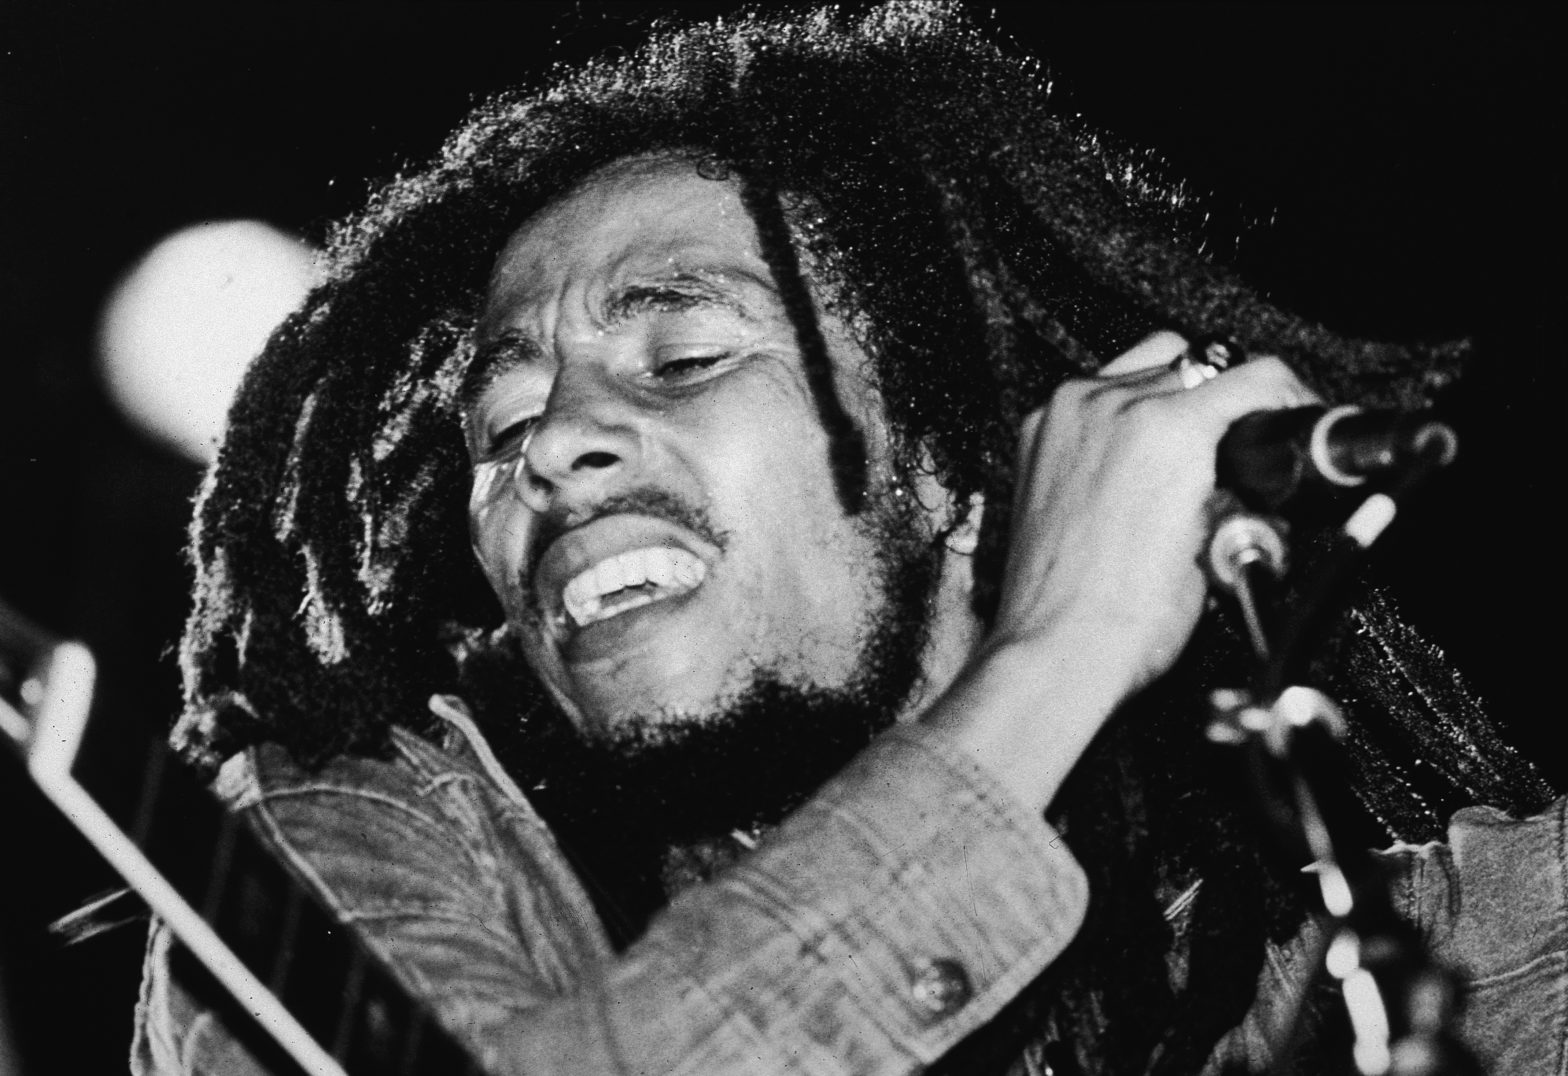 Travel Like Bob Marley: 5 Spots in Jamaica That Were Important To The Legend